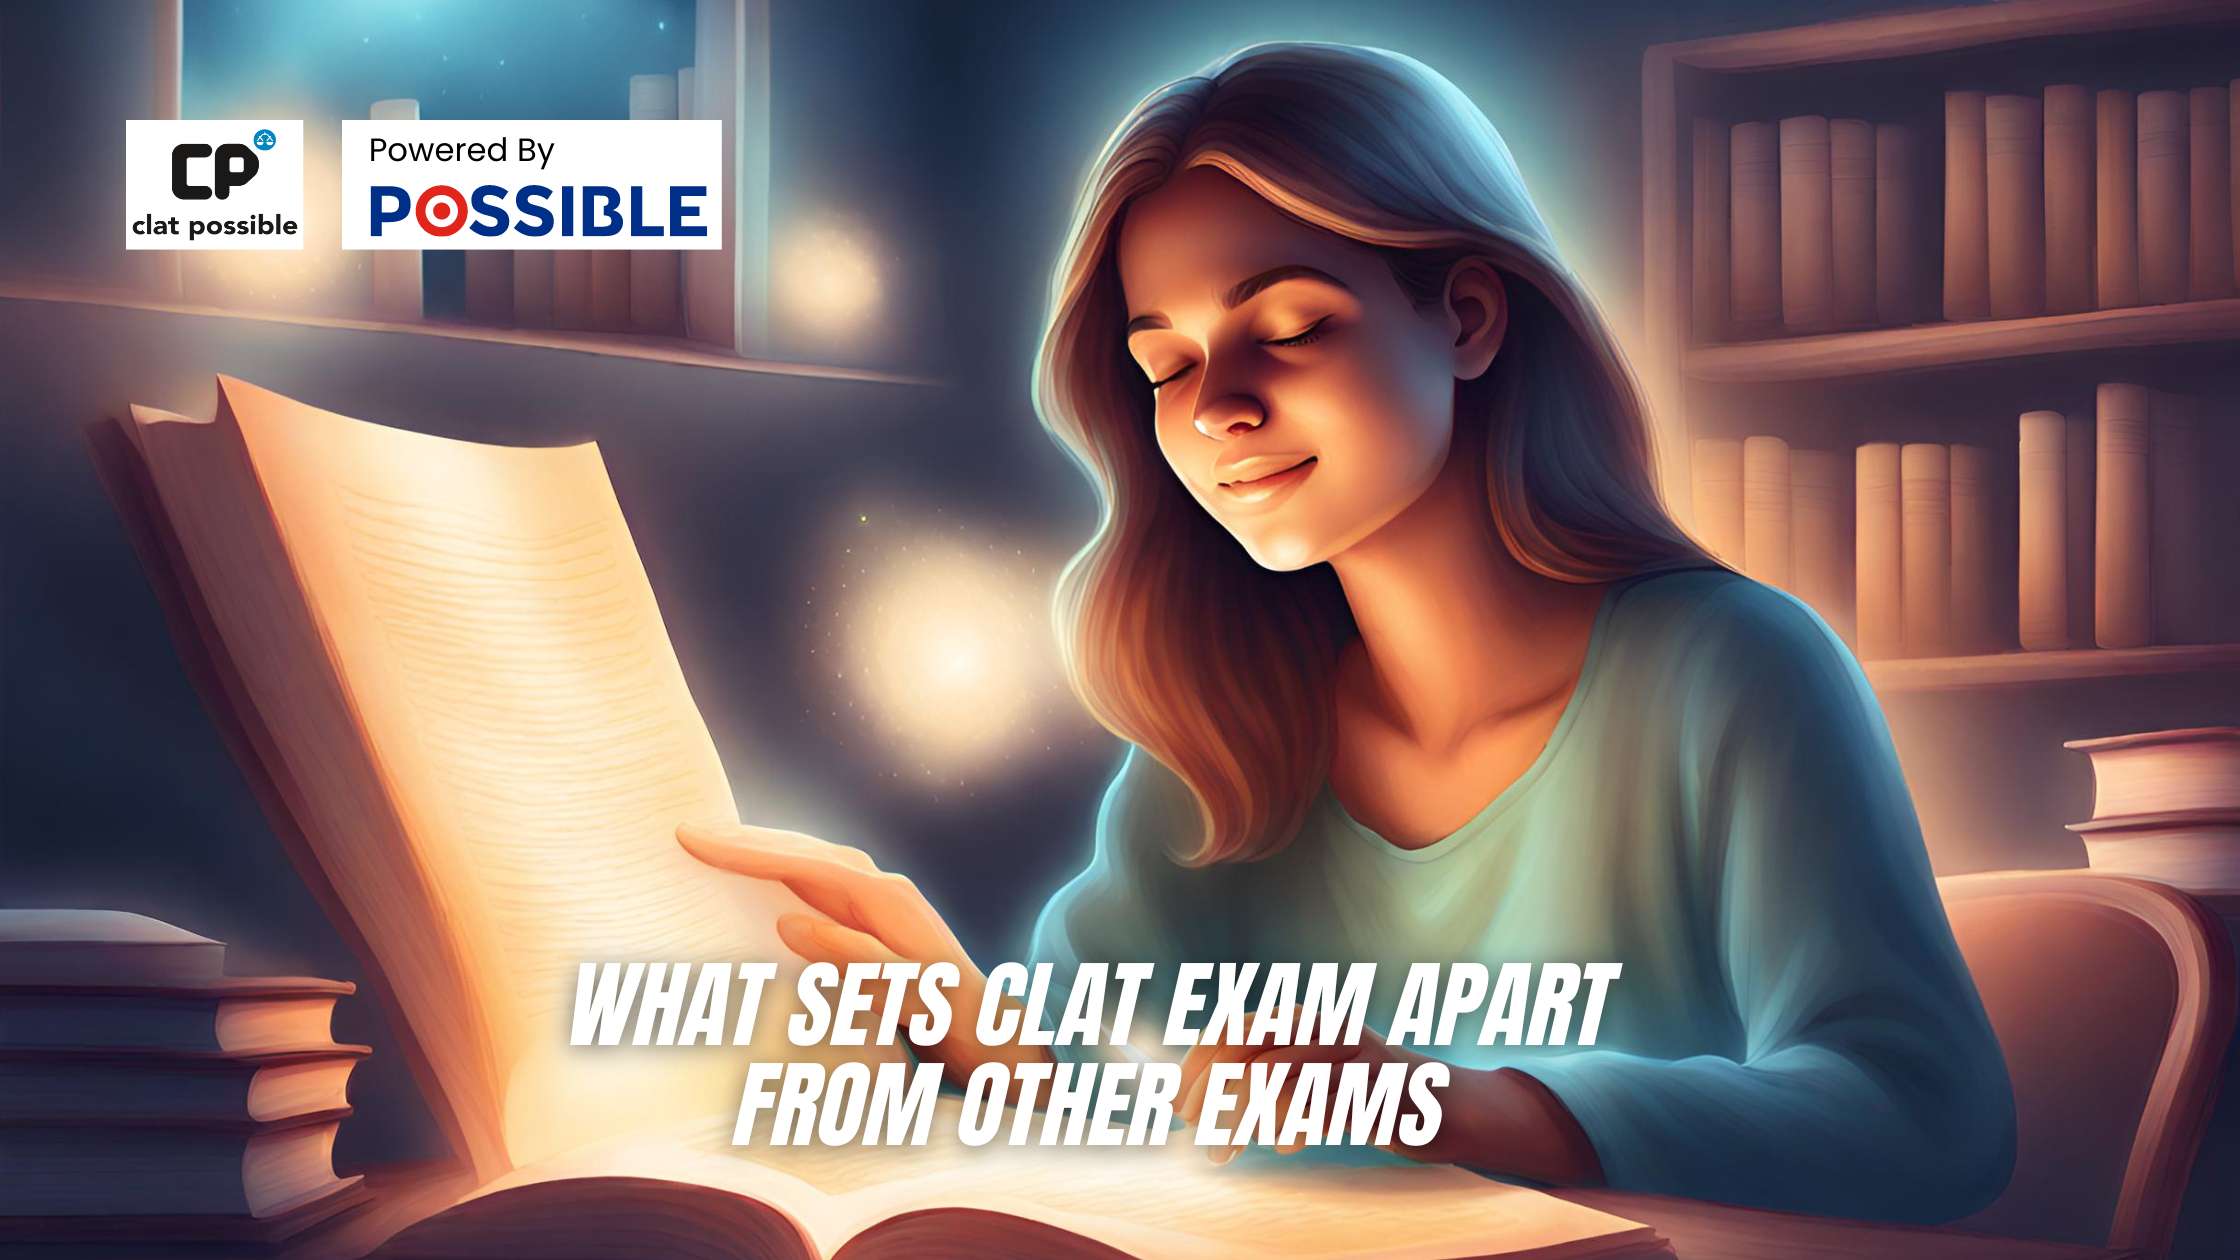 What Sets CLAT Exam Apart from Other Exams